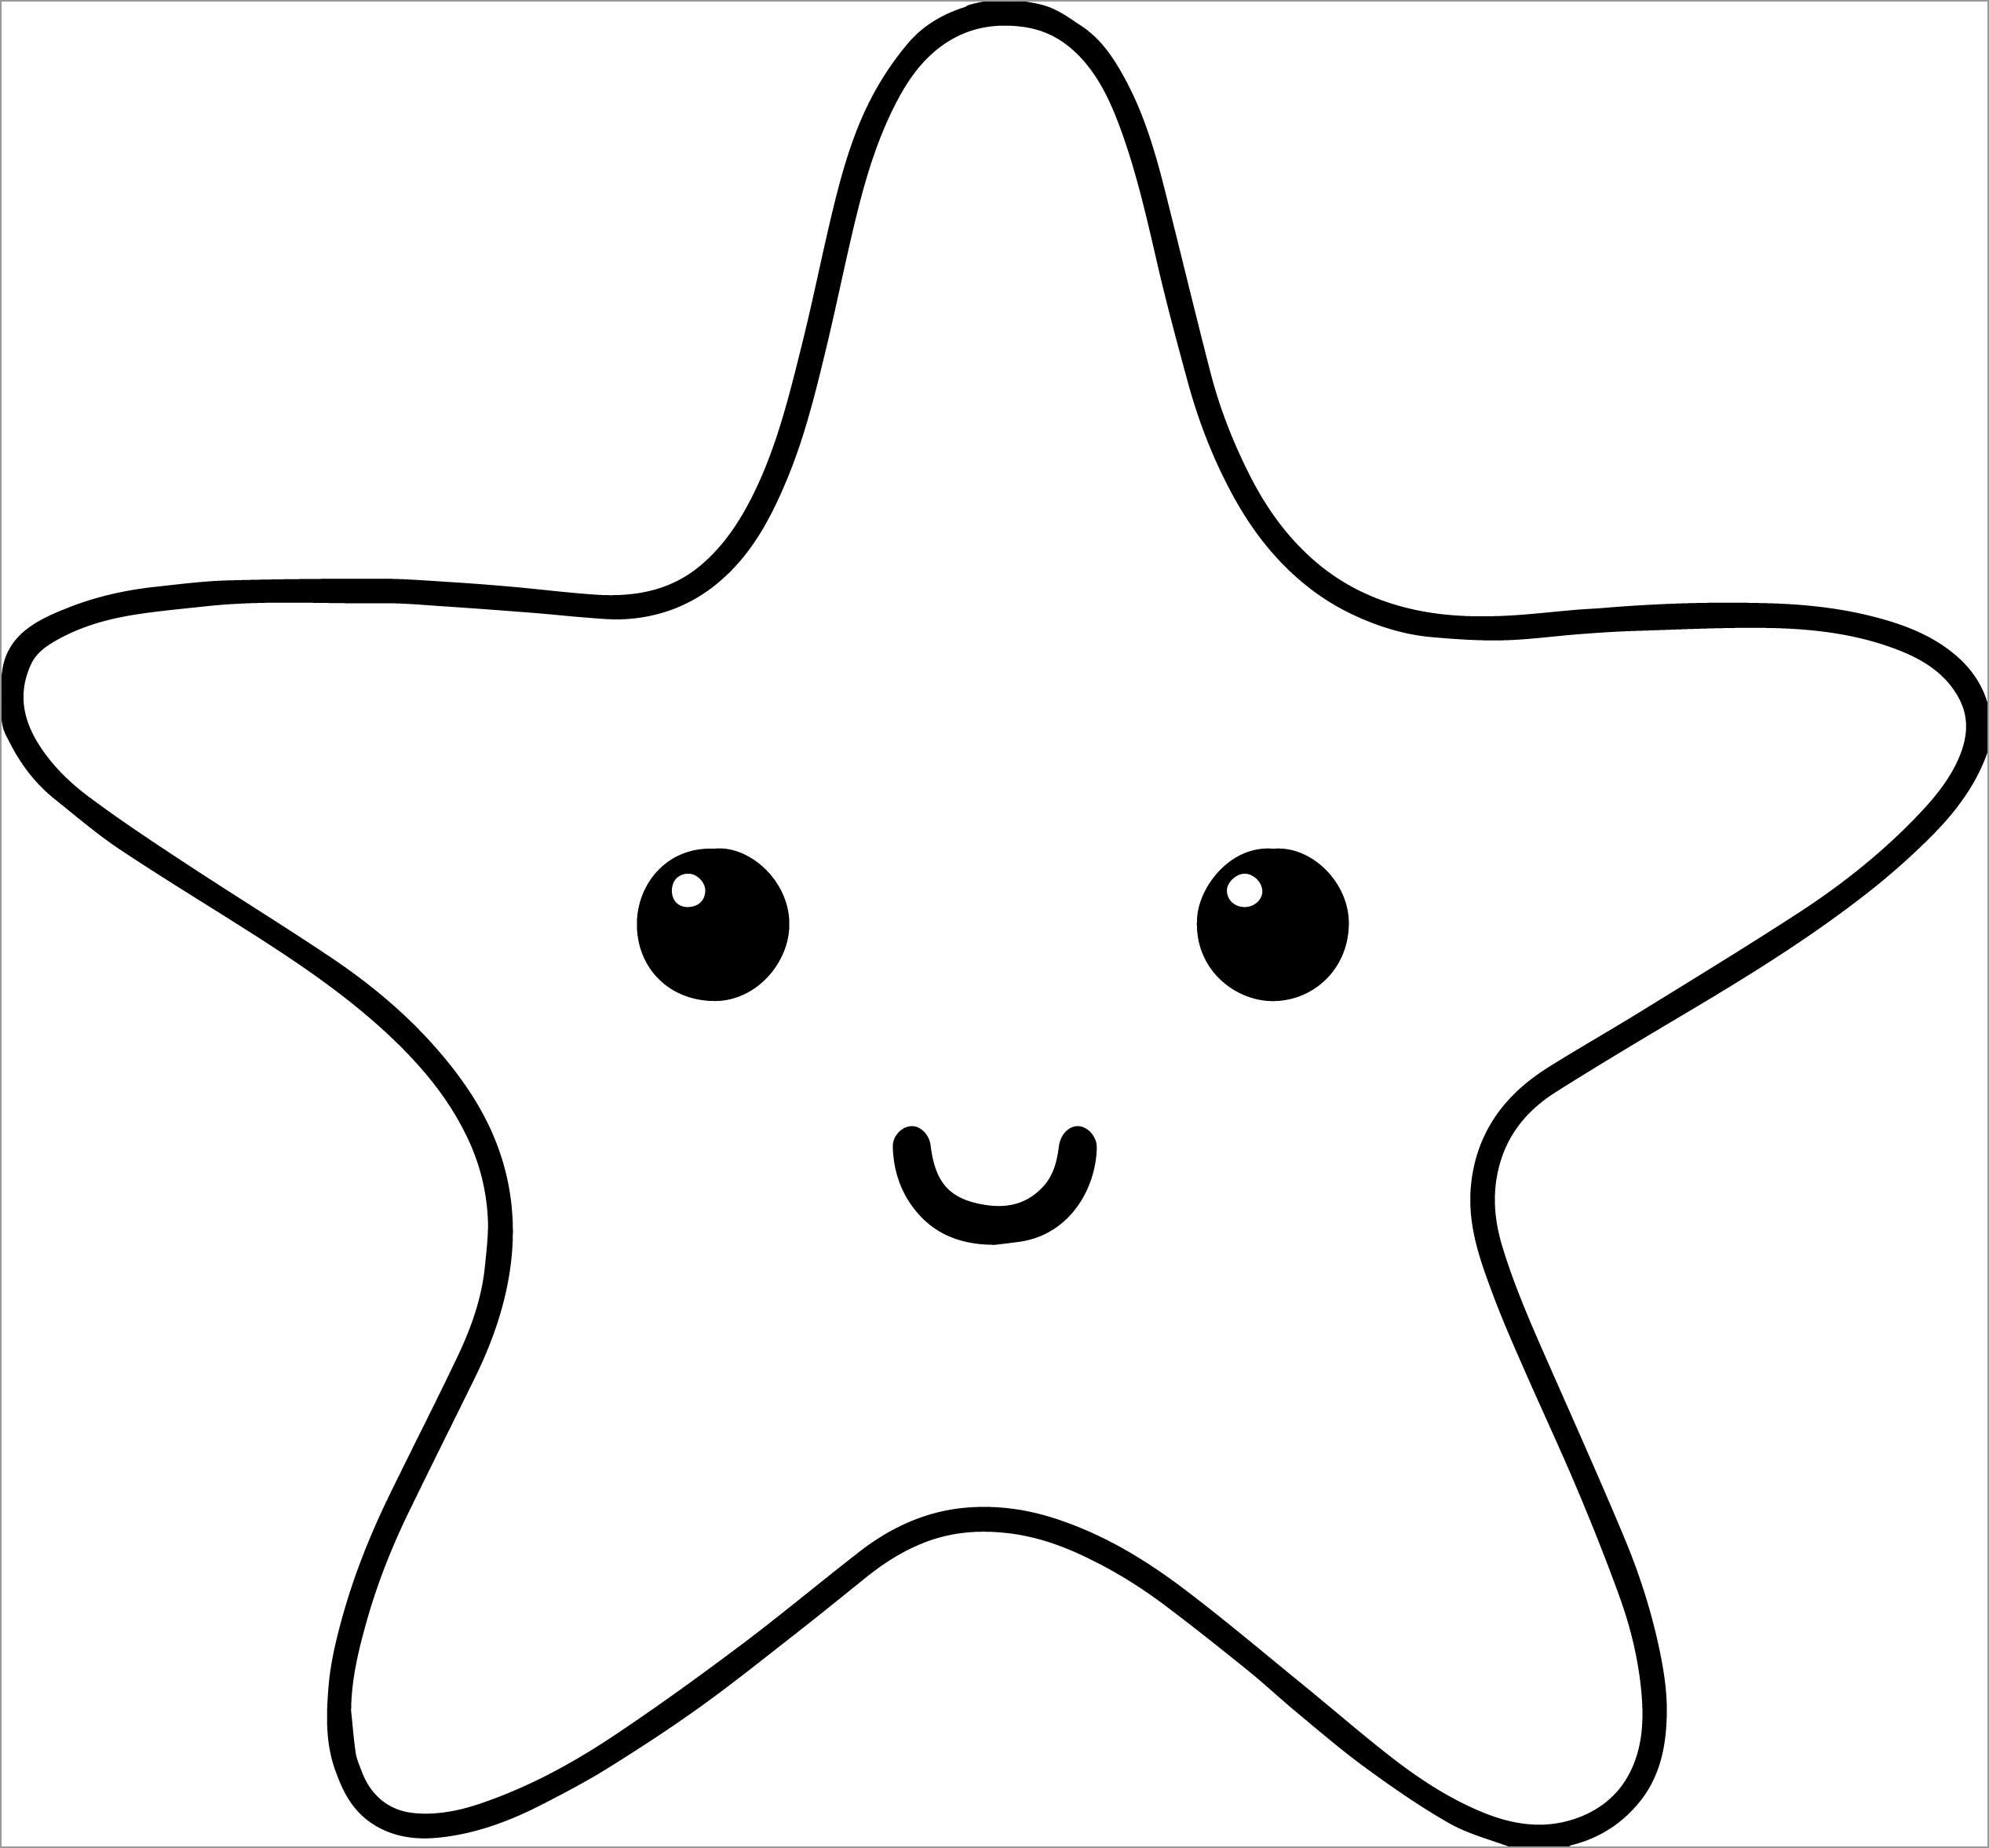 Download Starfish Coloring Pages - ColoringBay